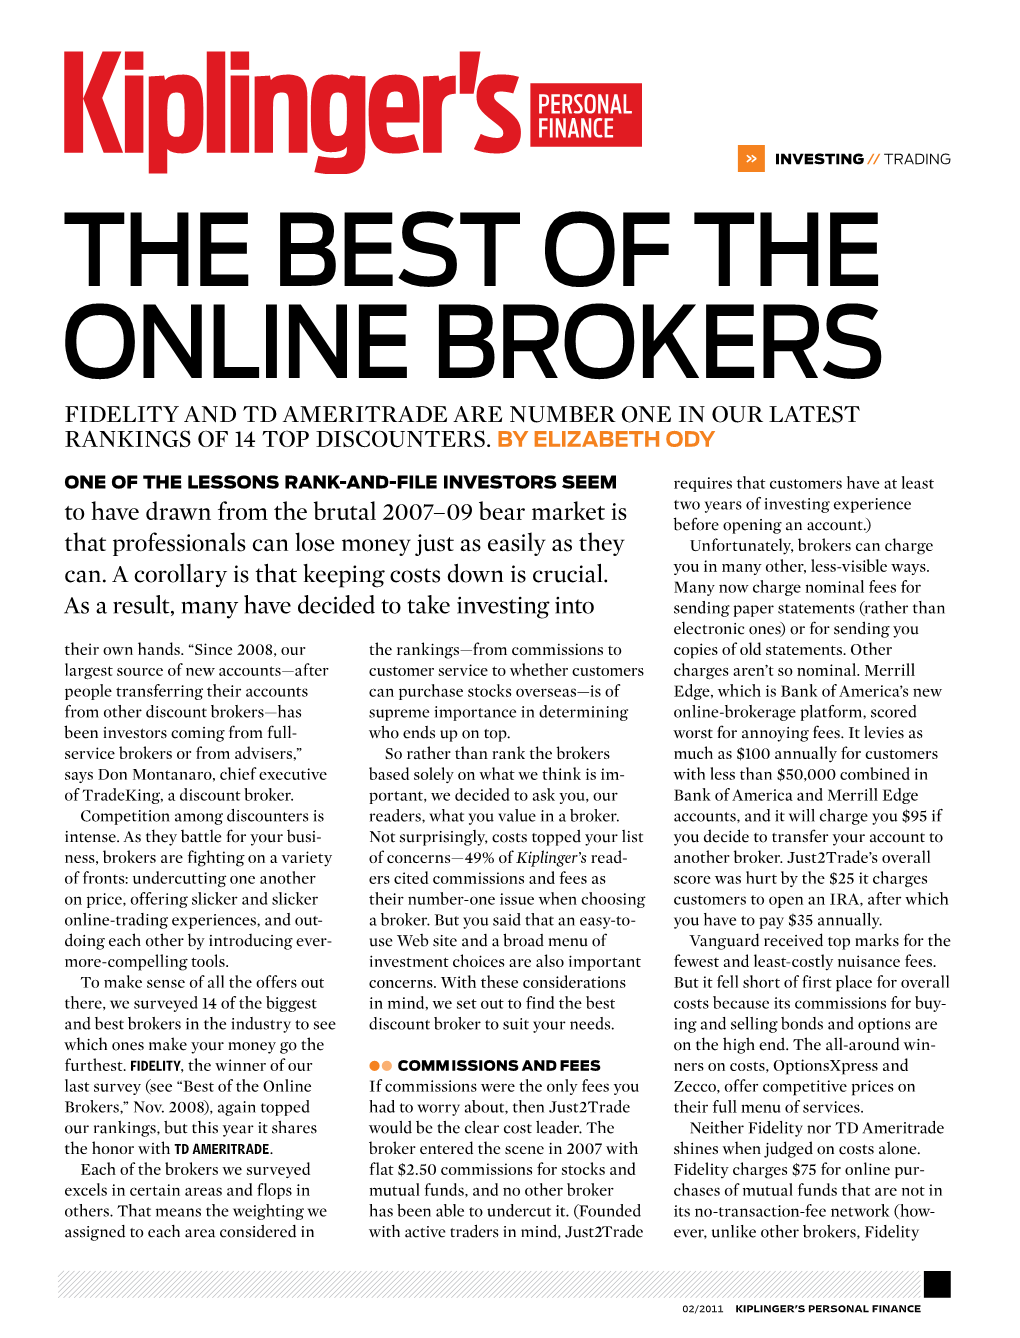 The Best of the Online Brokers Fidelity and TD Ameritrade Are Number One in Our Latest Rankings of 14 Top Discounters